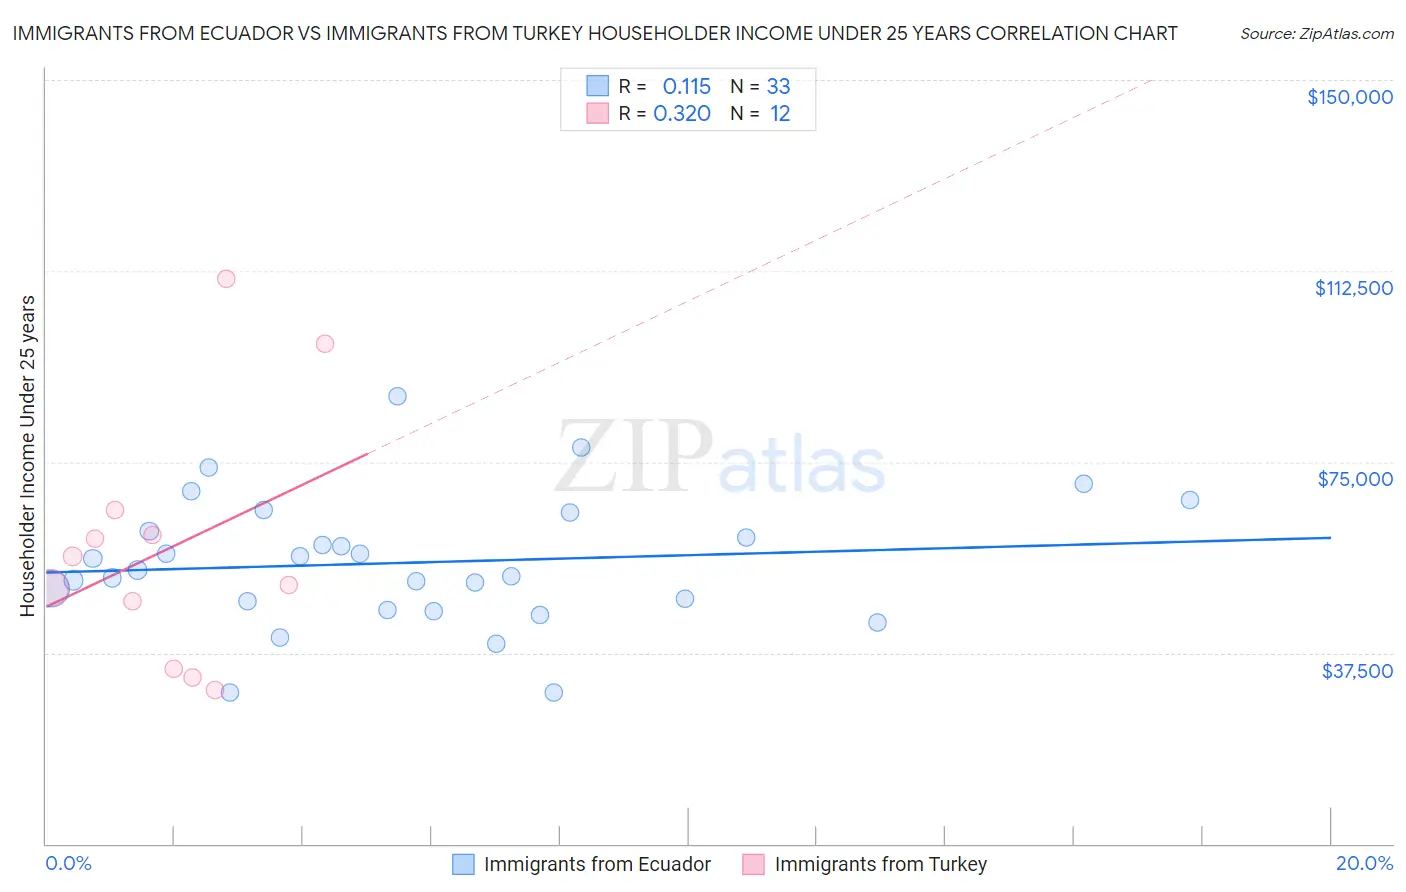 Immigrants from Ecuador vs Immigrants from Turkey Householder Income Under 25 years